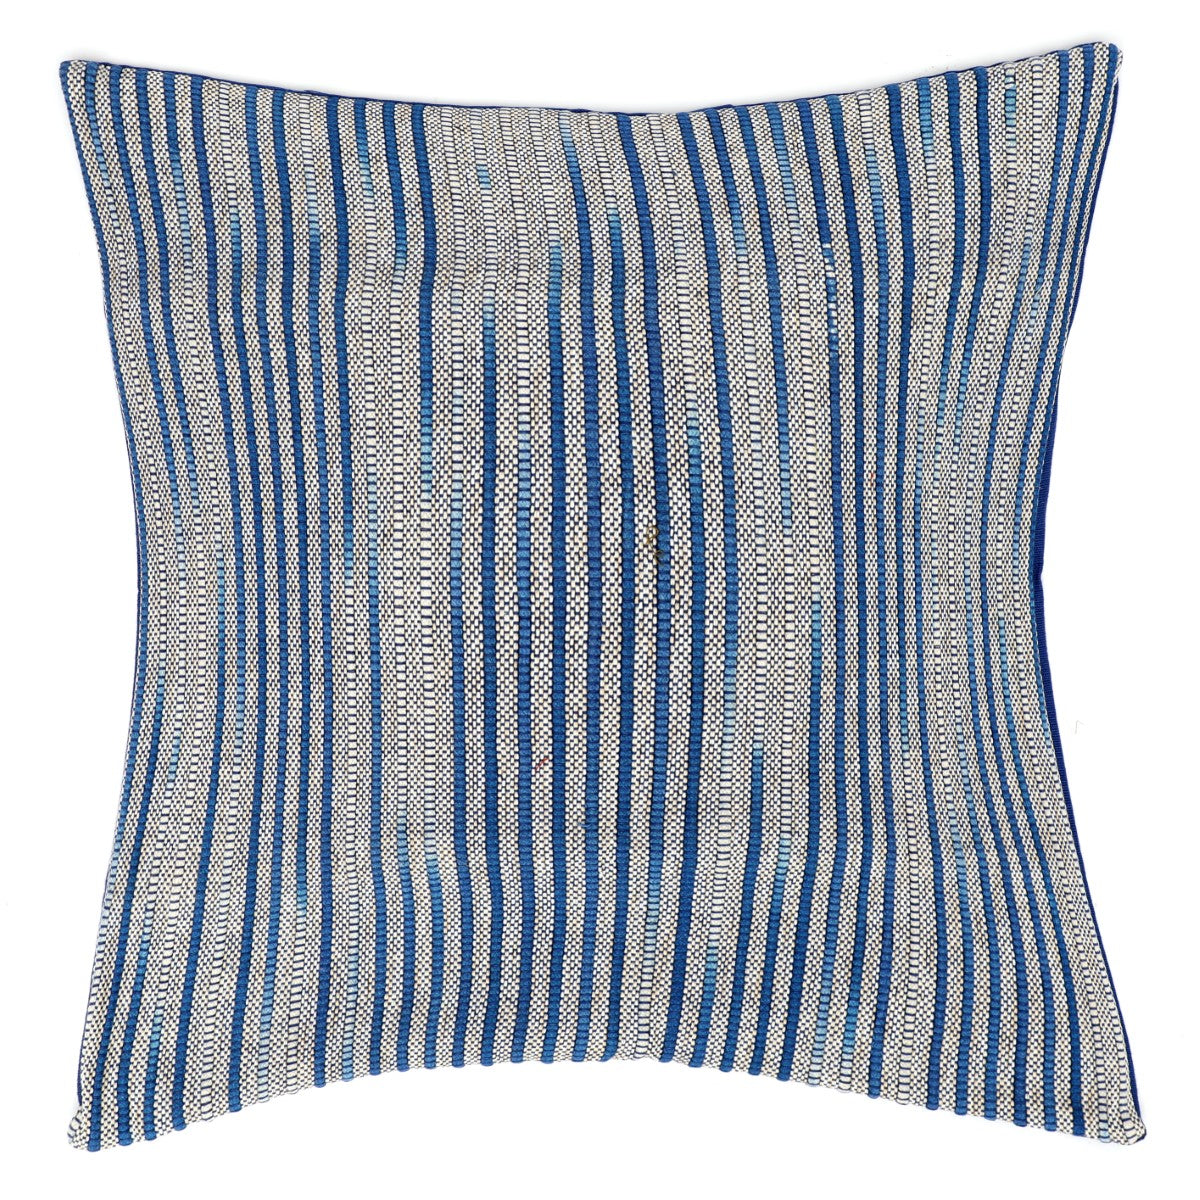 Blue Water Cushion Cover 18x18" (MB)